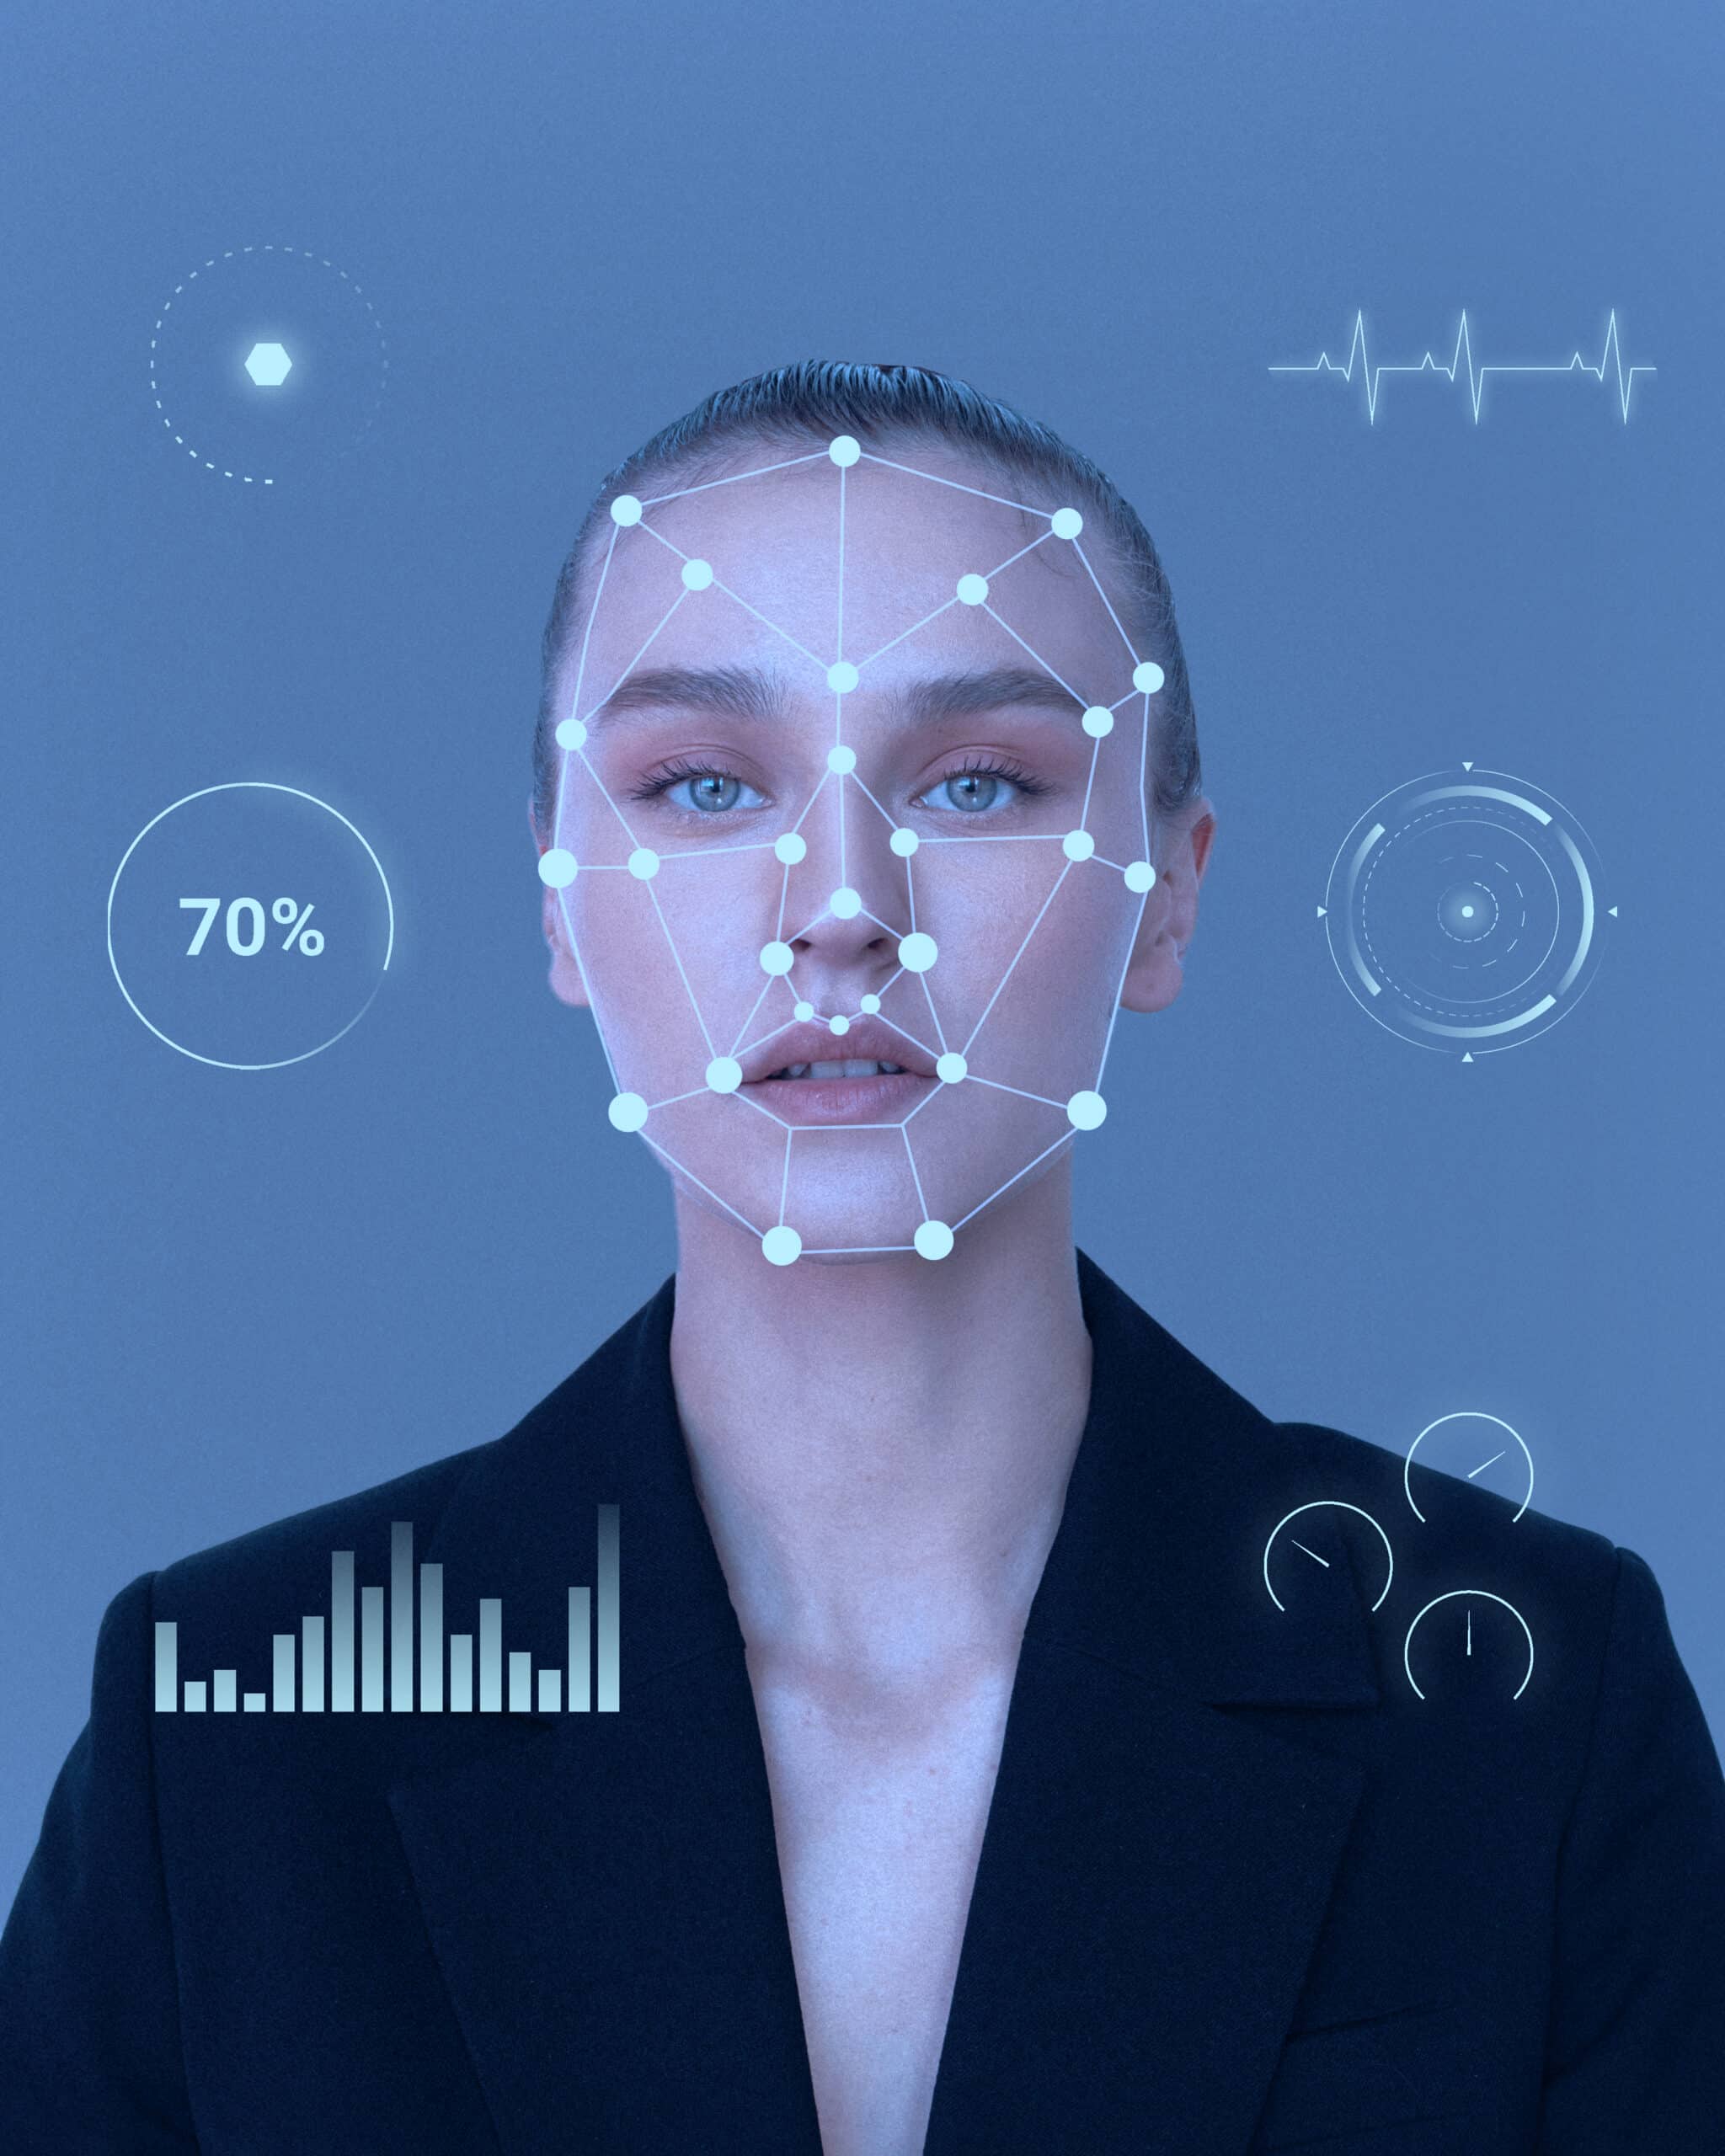 Maximizing Security: Implementing Facial Recognition for Identity Verification